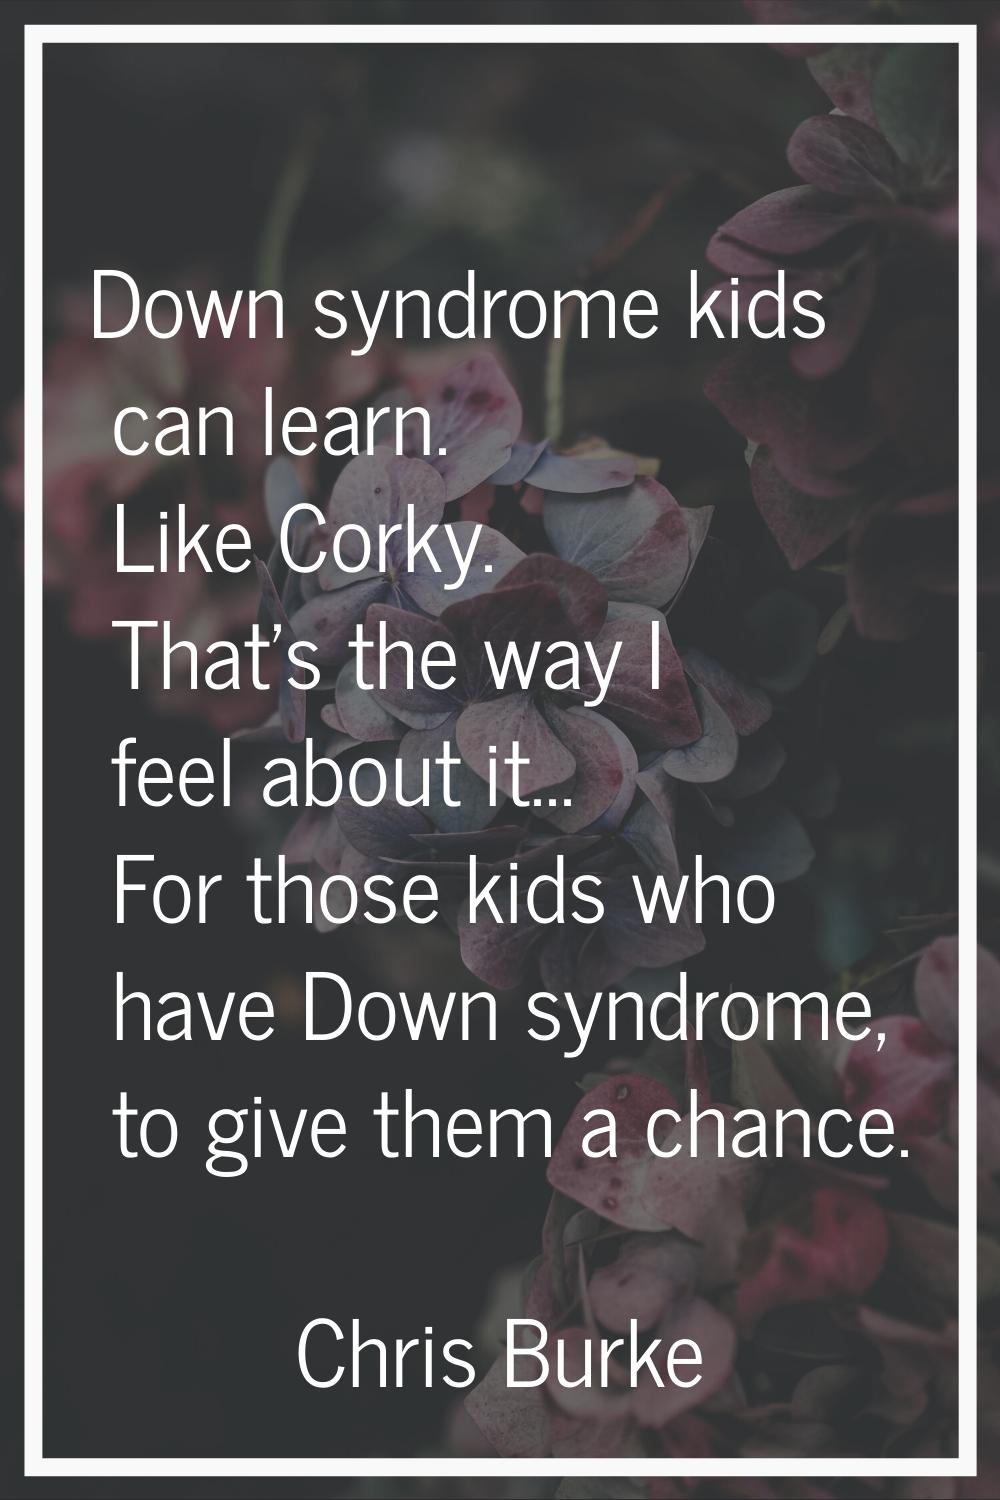 Down syndrome kids can learn. Like Corky. That's the way I feel about it... For those kids who have